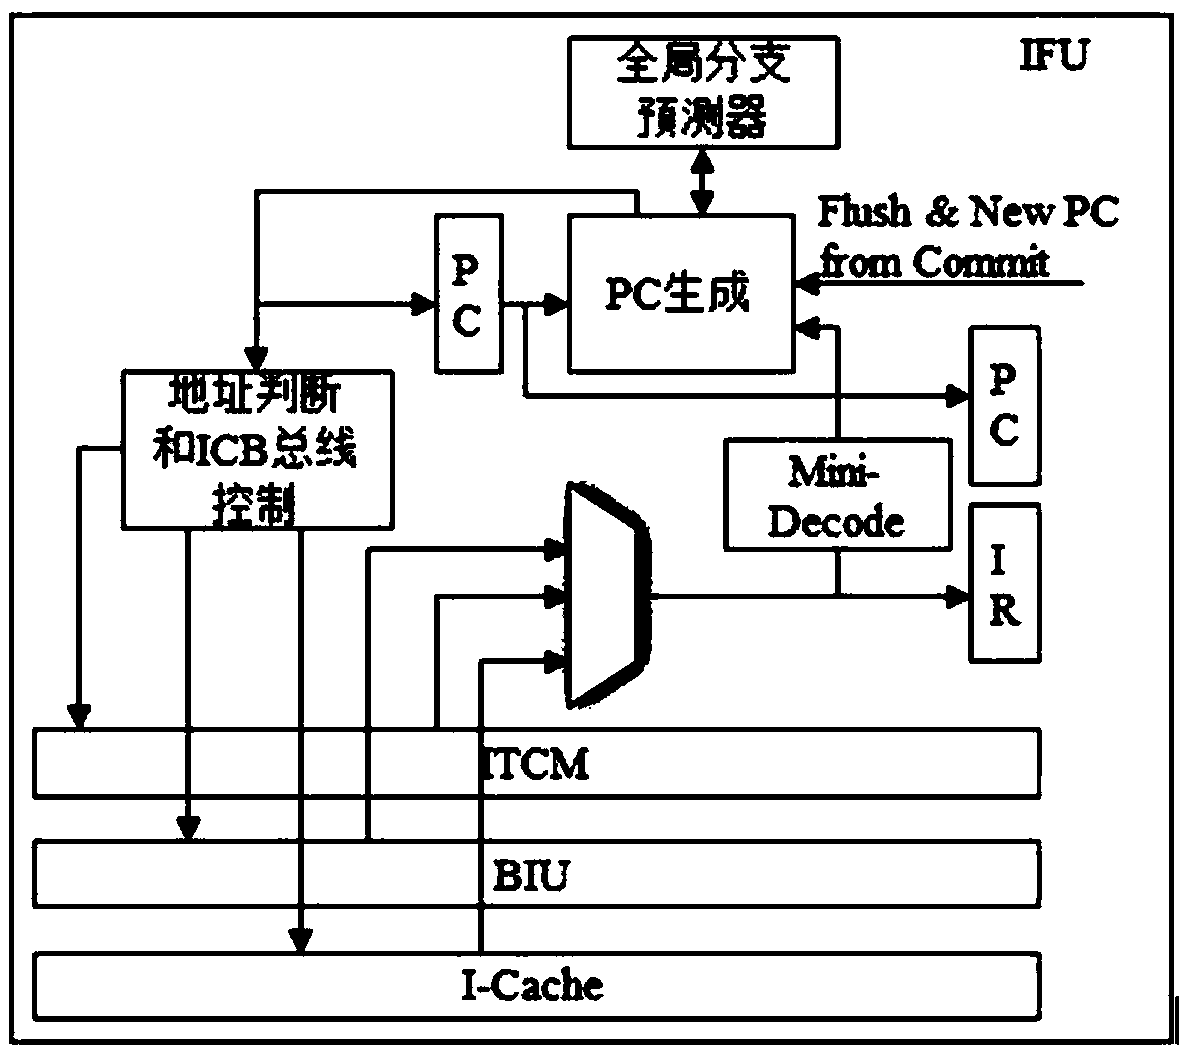 Two-level pipeline architecture based on RISC-V instruction set